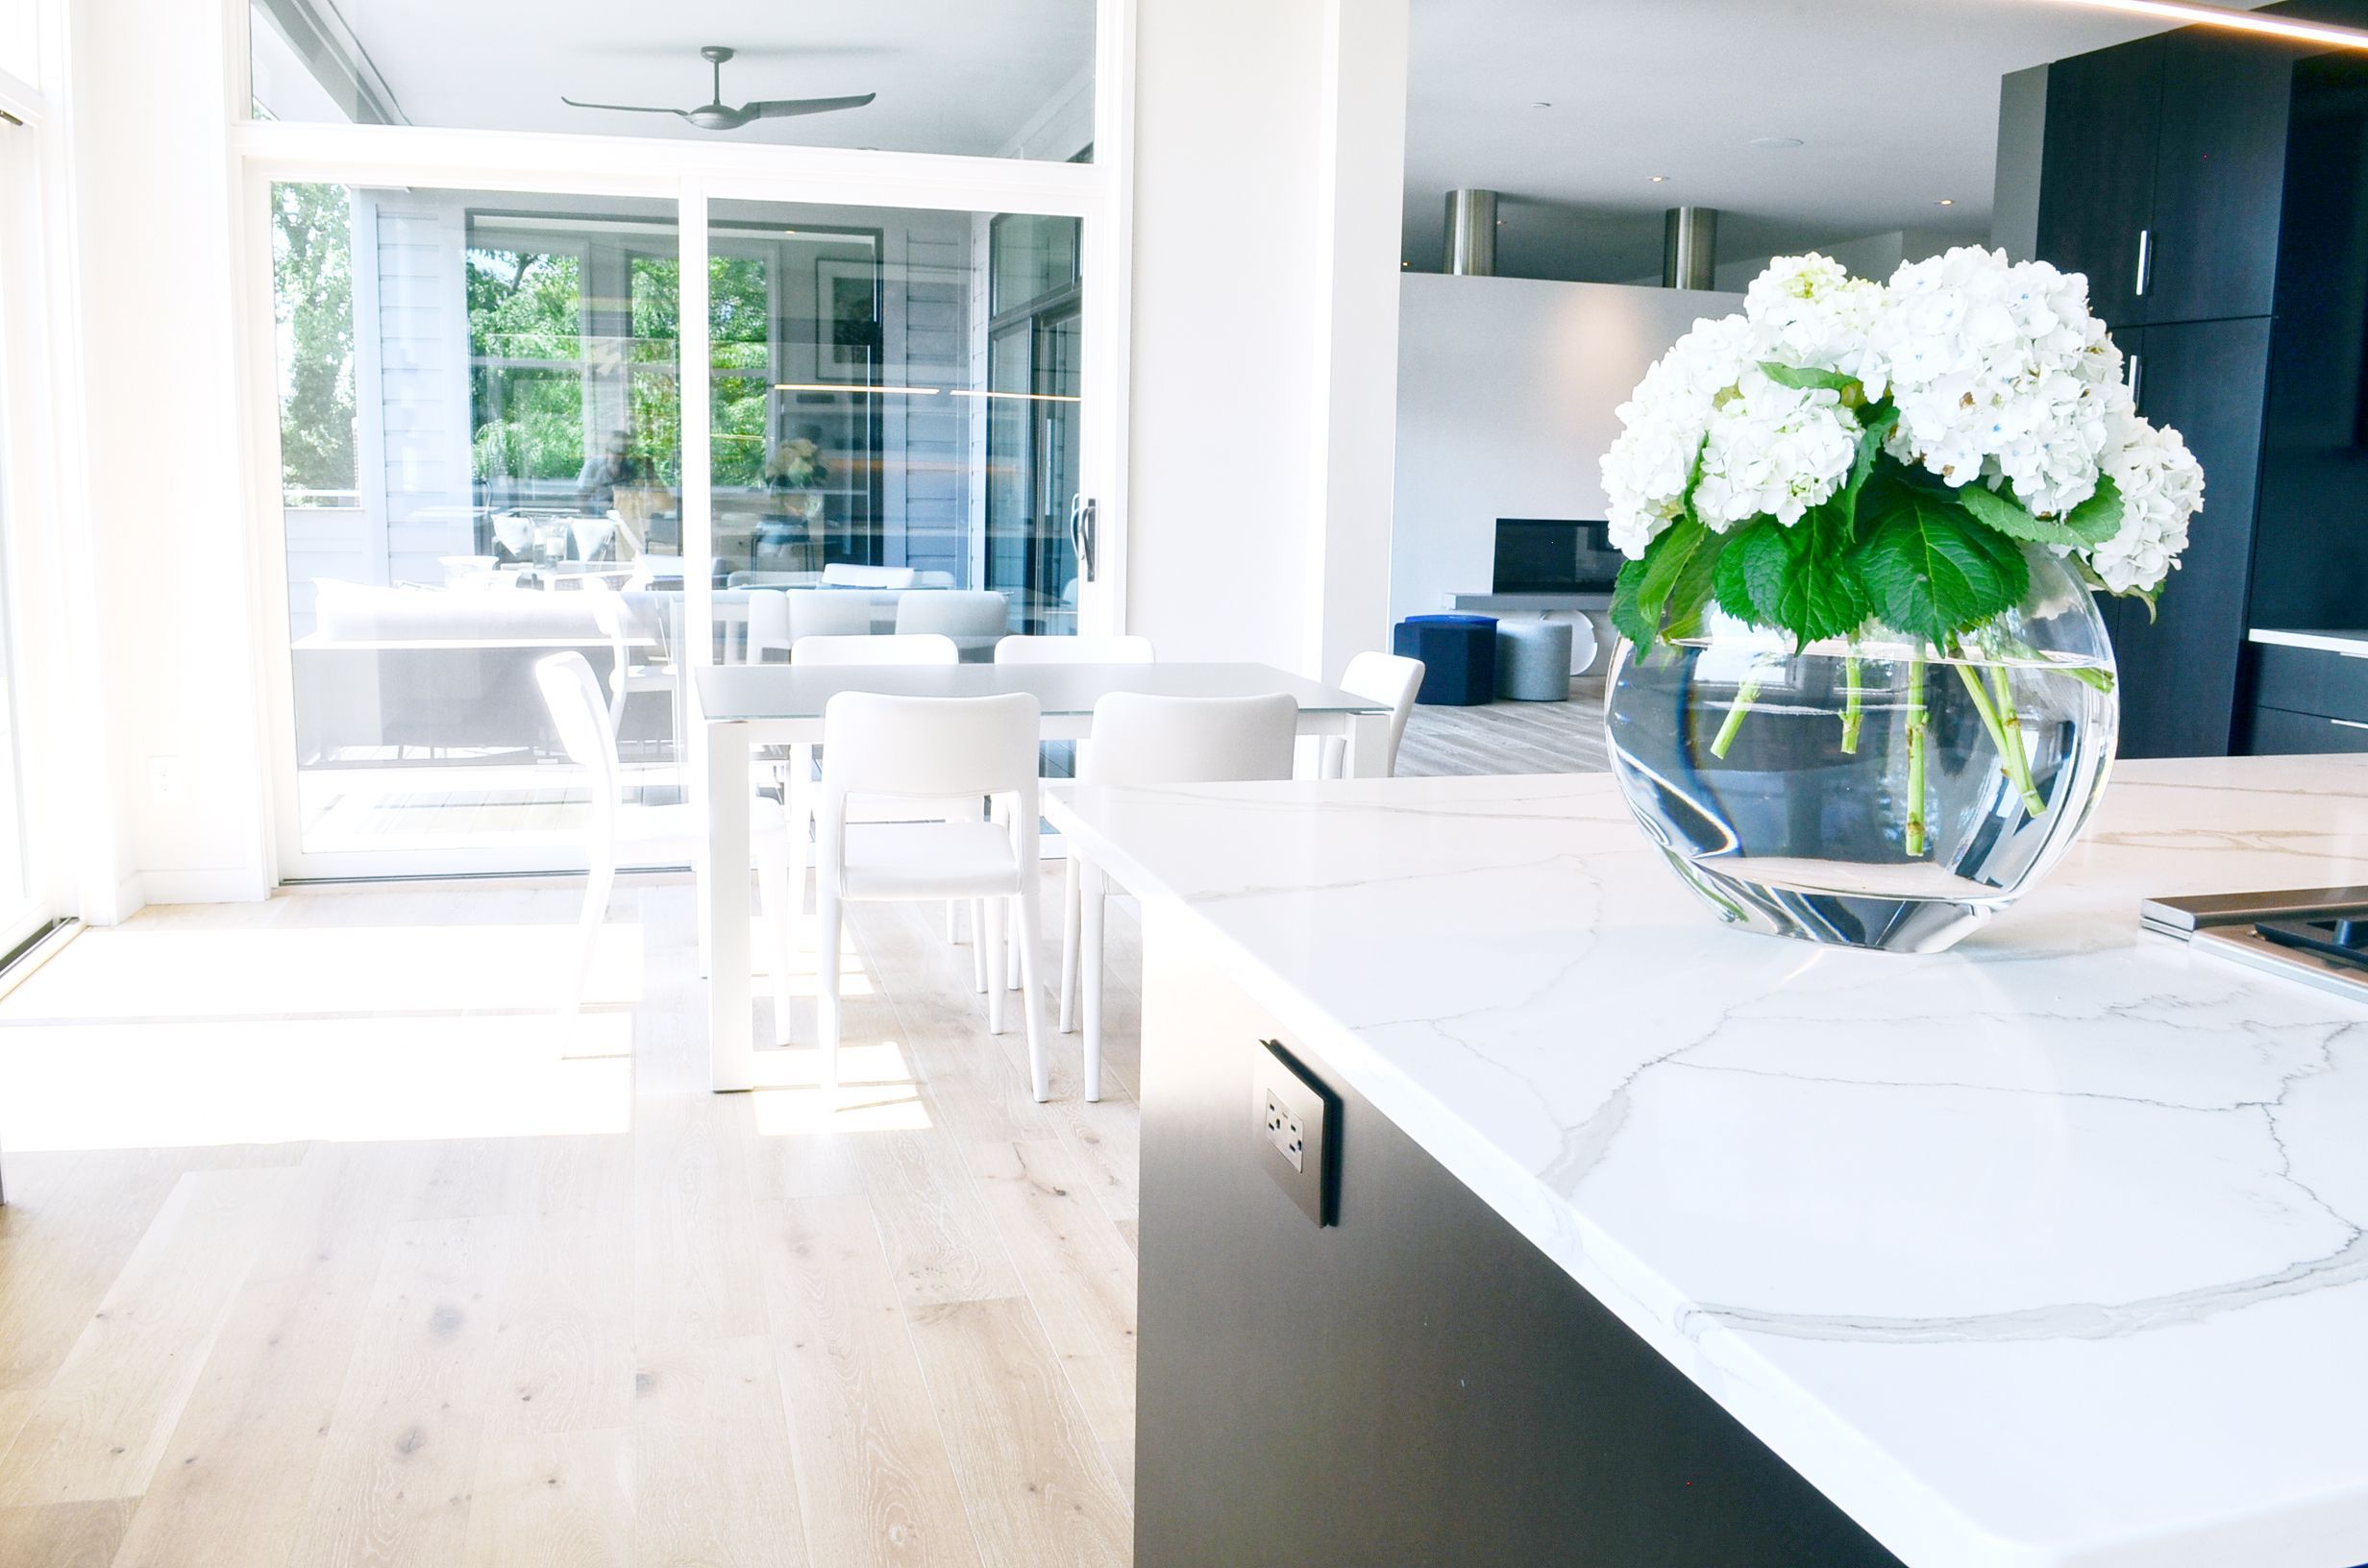 Minimal, modern, and clean white furnishings in a modern kitchen by interior designer, RM Interiors.